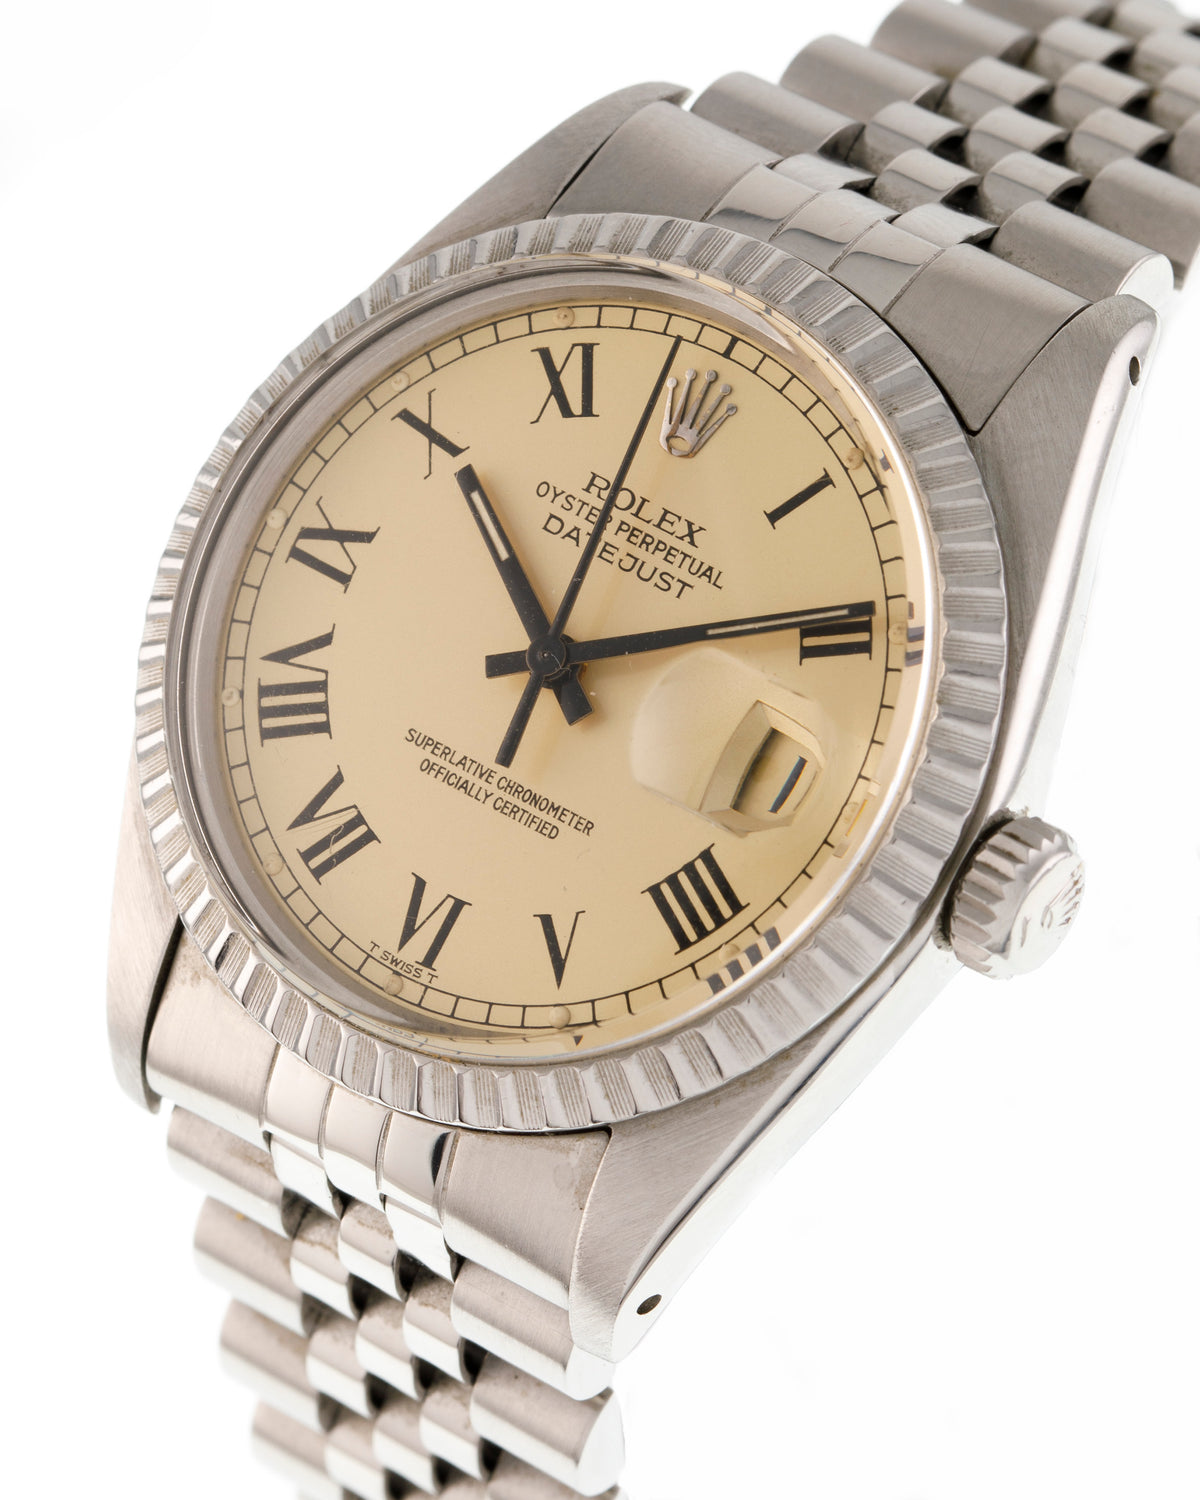 Rolex Oyster Perpetual Date Just with special cream dial